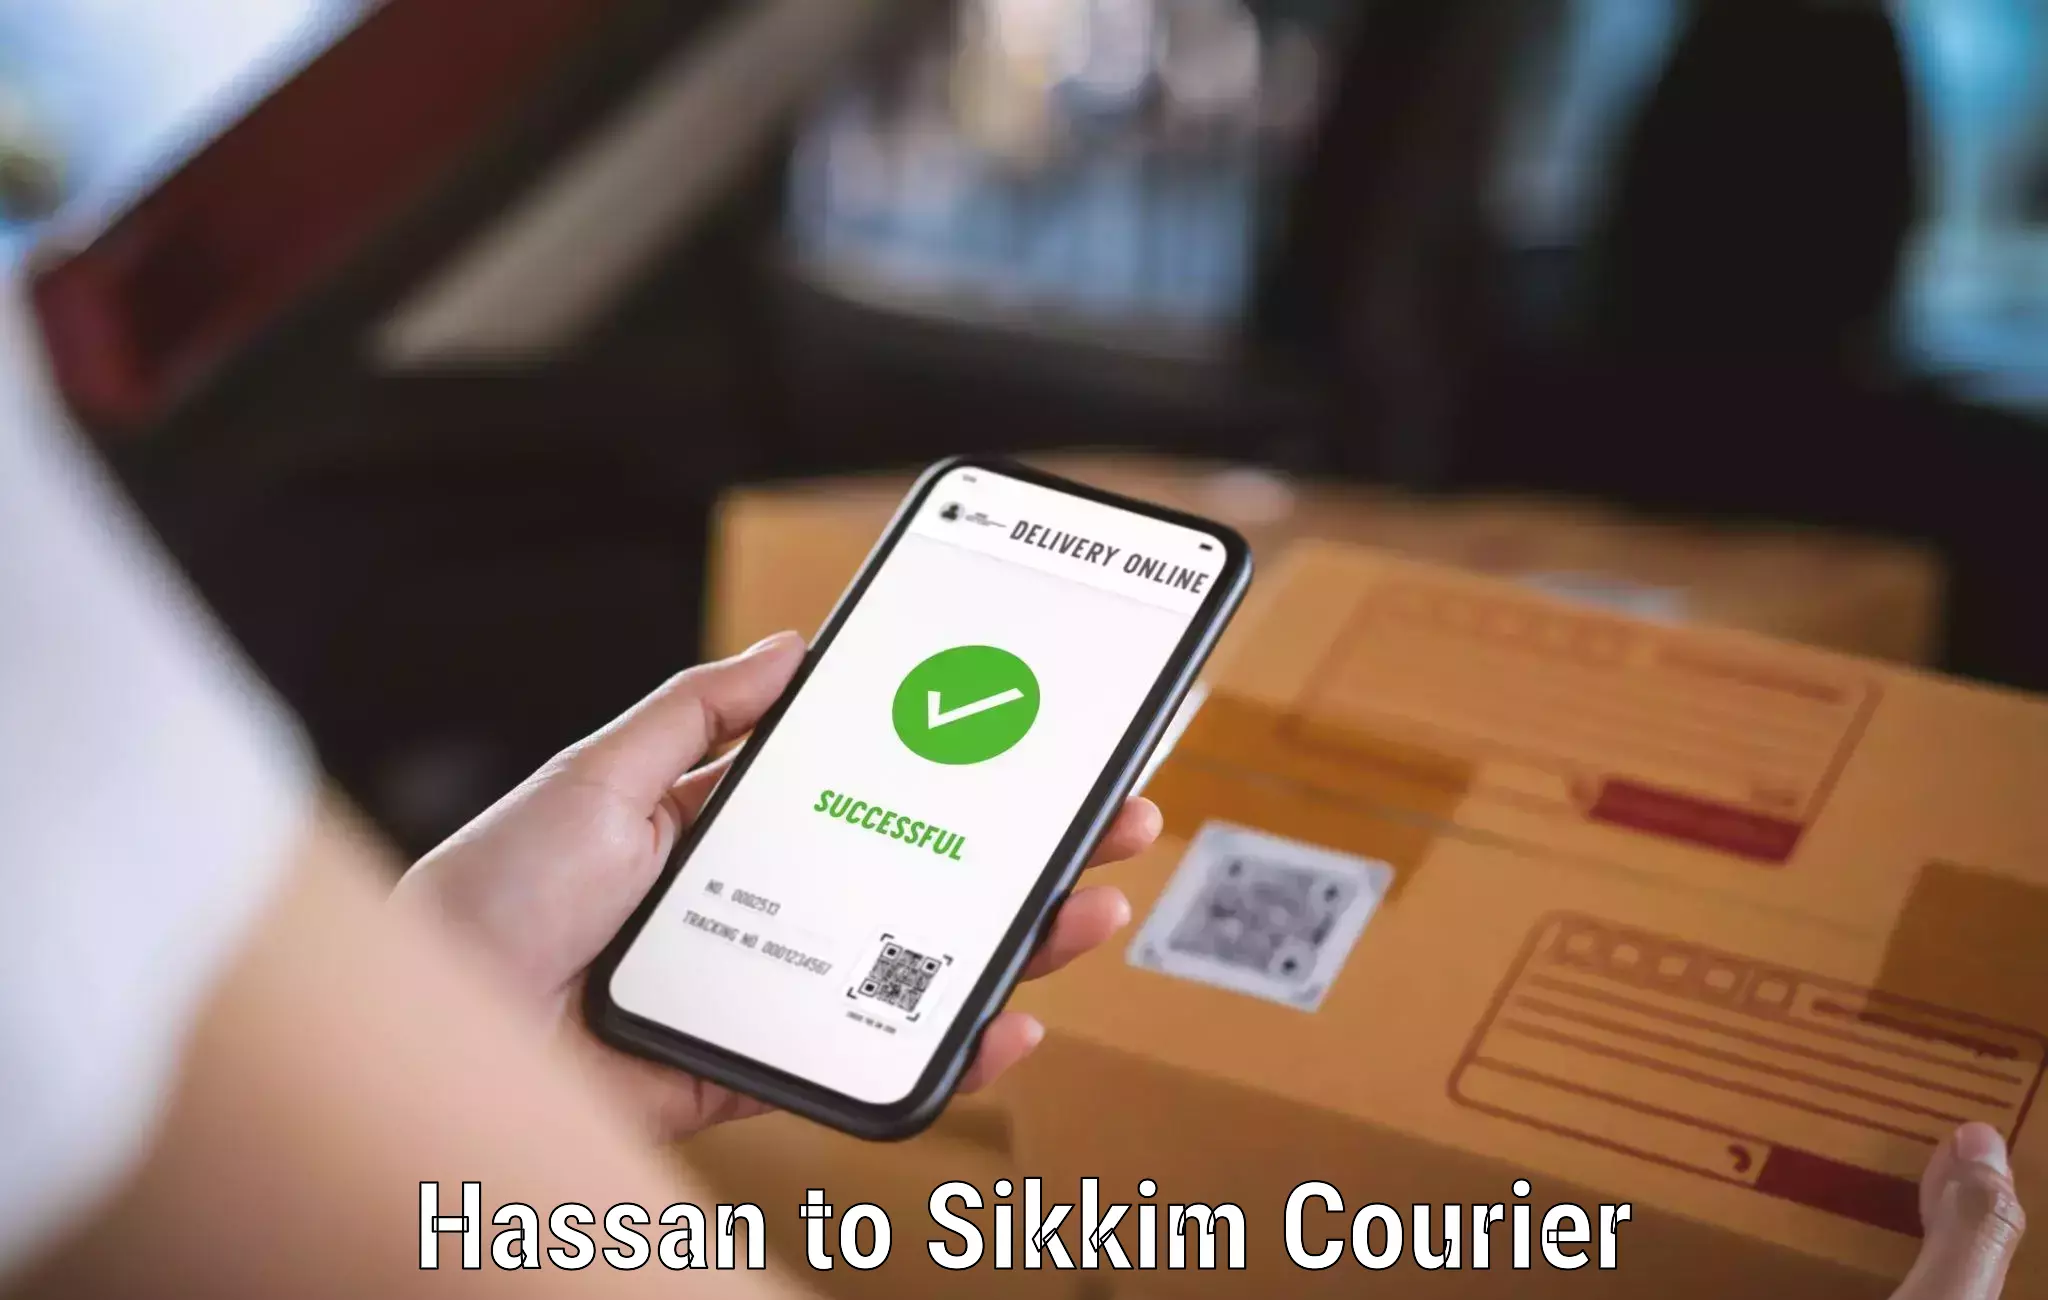 Cash on delivery service Hassan to Mangan